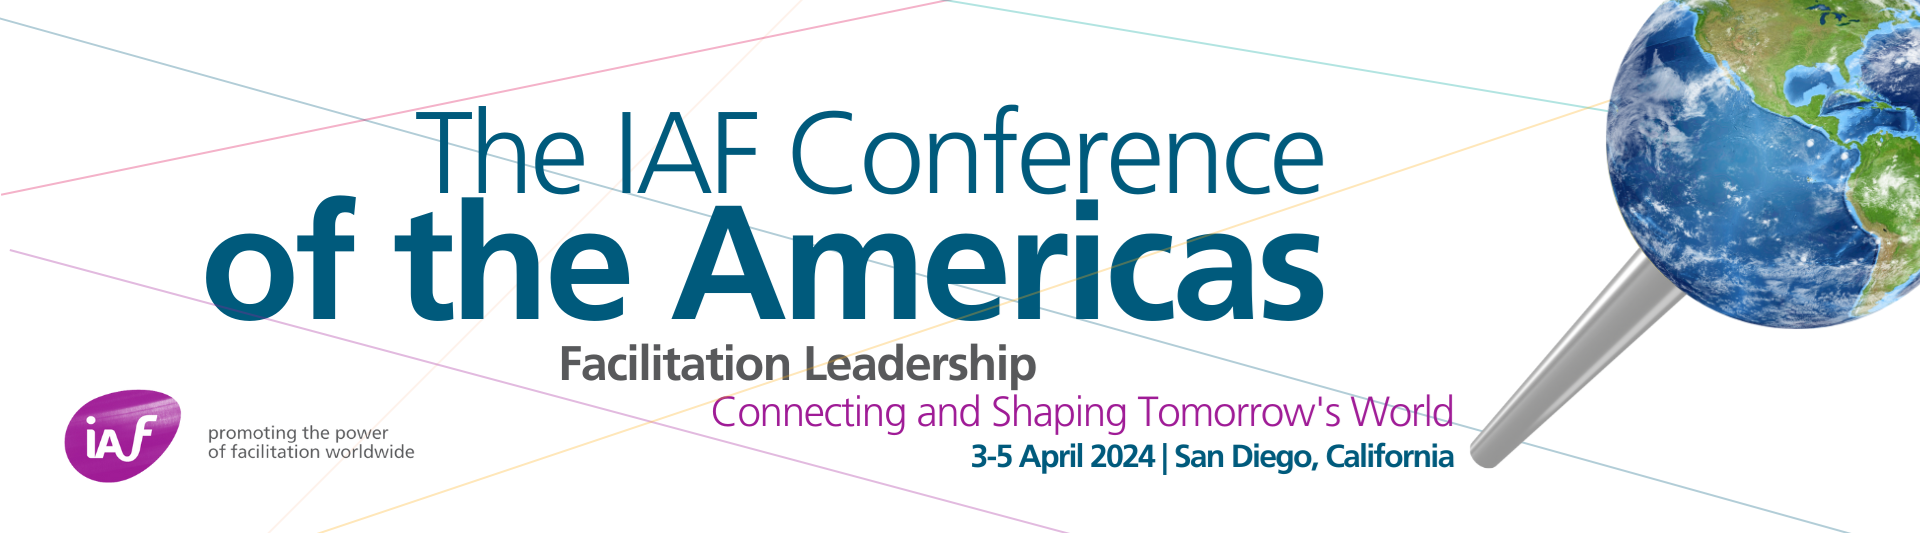 IAF Conference of the Americas